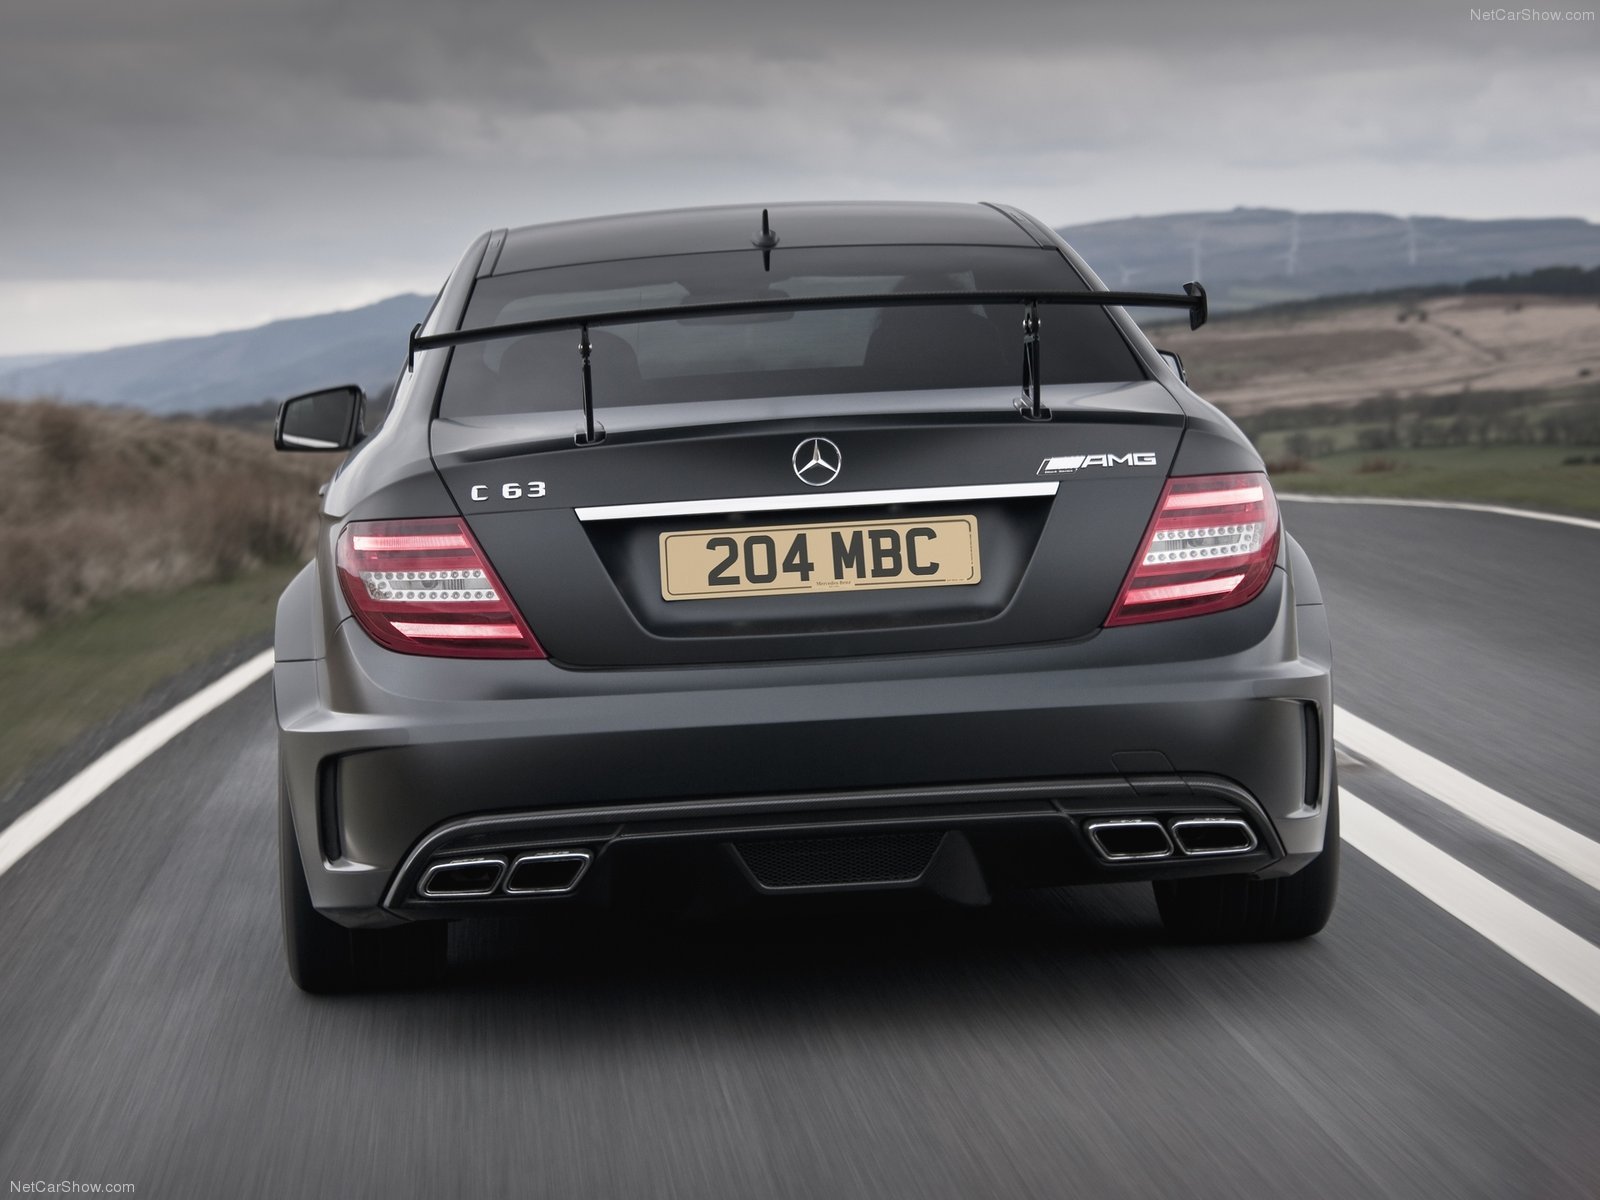 Mercedes Benz C63 Amg Coupe Black Series Cars 12 Wallpapers Hd Desktop And Mobile Backgrounds